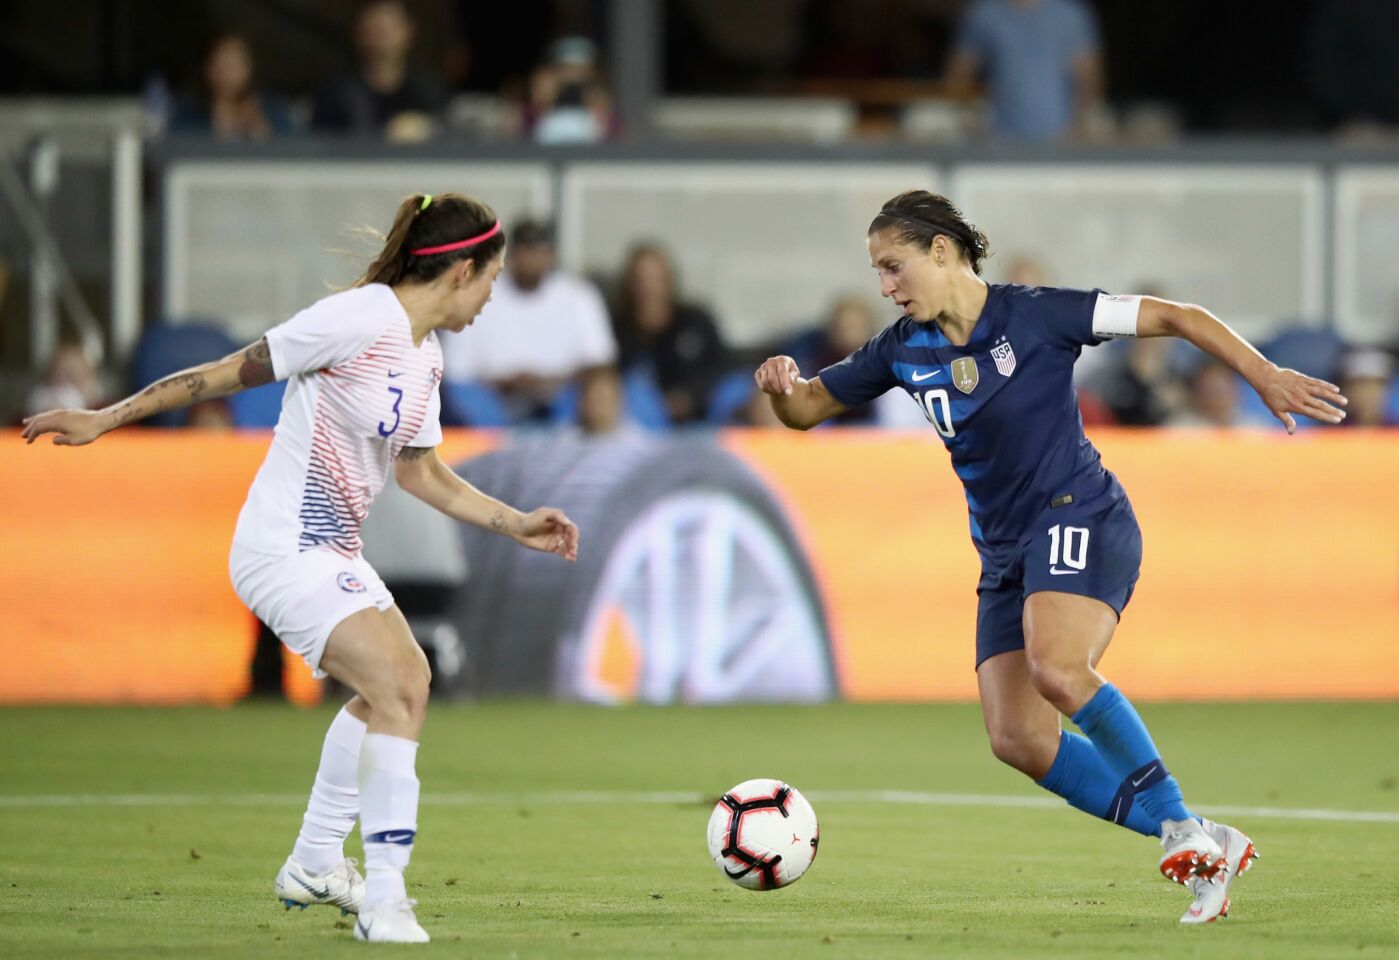 SAN JOSE, CA - SEPTEMBER 04: Carli Lloyd of the United States gets past Carla Guerrero of Chile to score her second goal during their match at Avaya Stadium on September 4, 2018 in San Jose, California. (Photo by Ezra Shaw/Getty Images) ** OUTS - ELSENT, FPG, CM - OUTS * NM, PH, VA if sourced by CT, LA or MoD **